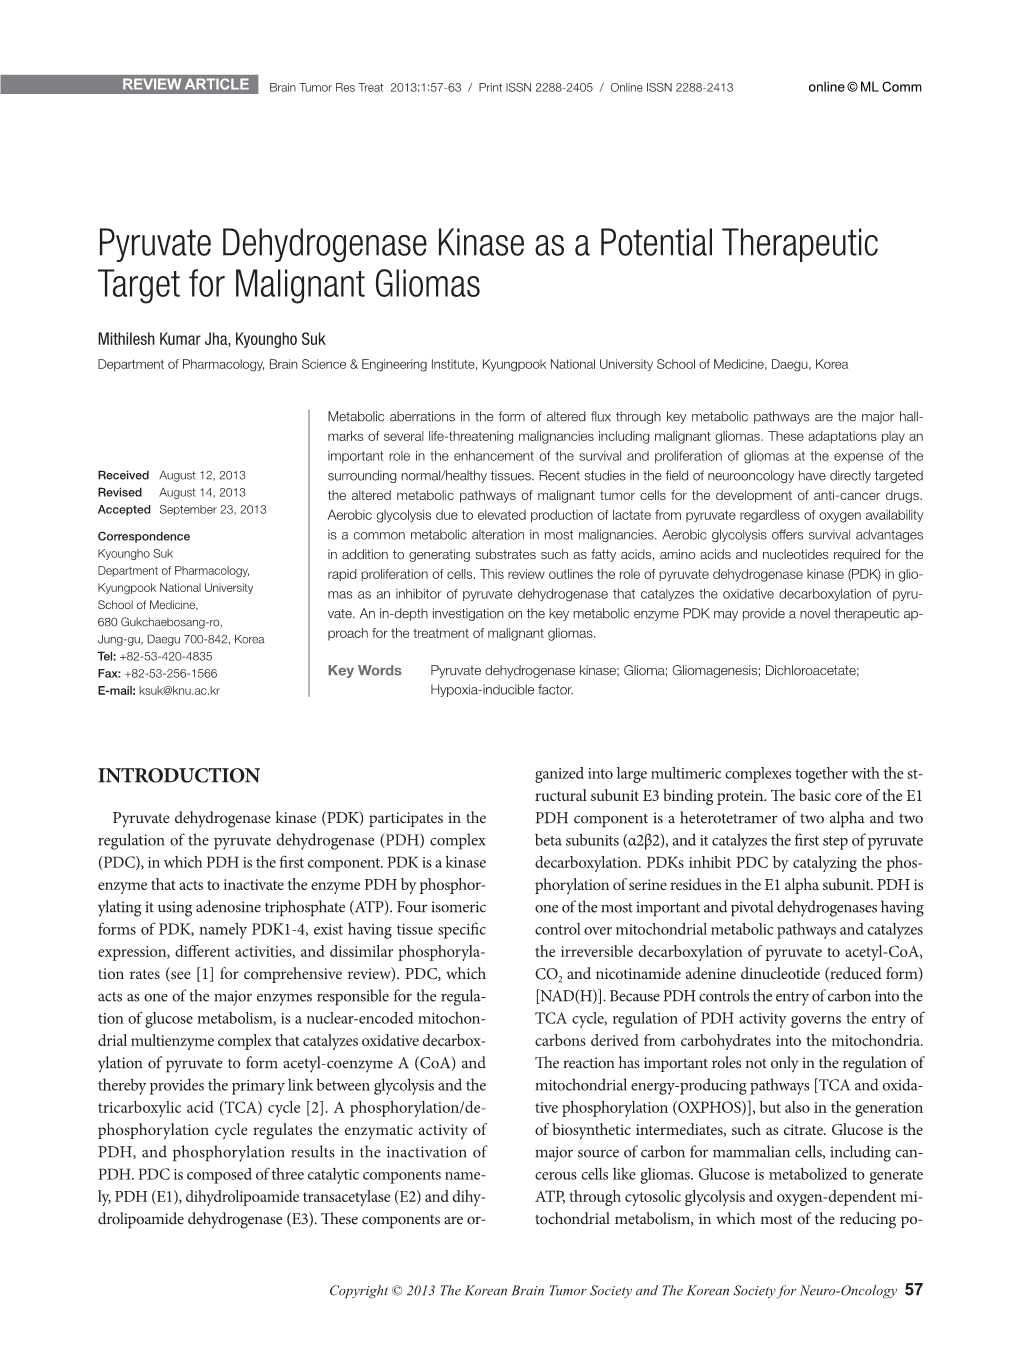 Pyruvate Dehydrogenase Kinase As a Potential Therapeutic Target for Malignant Gliomas